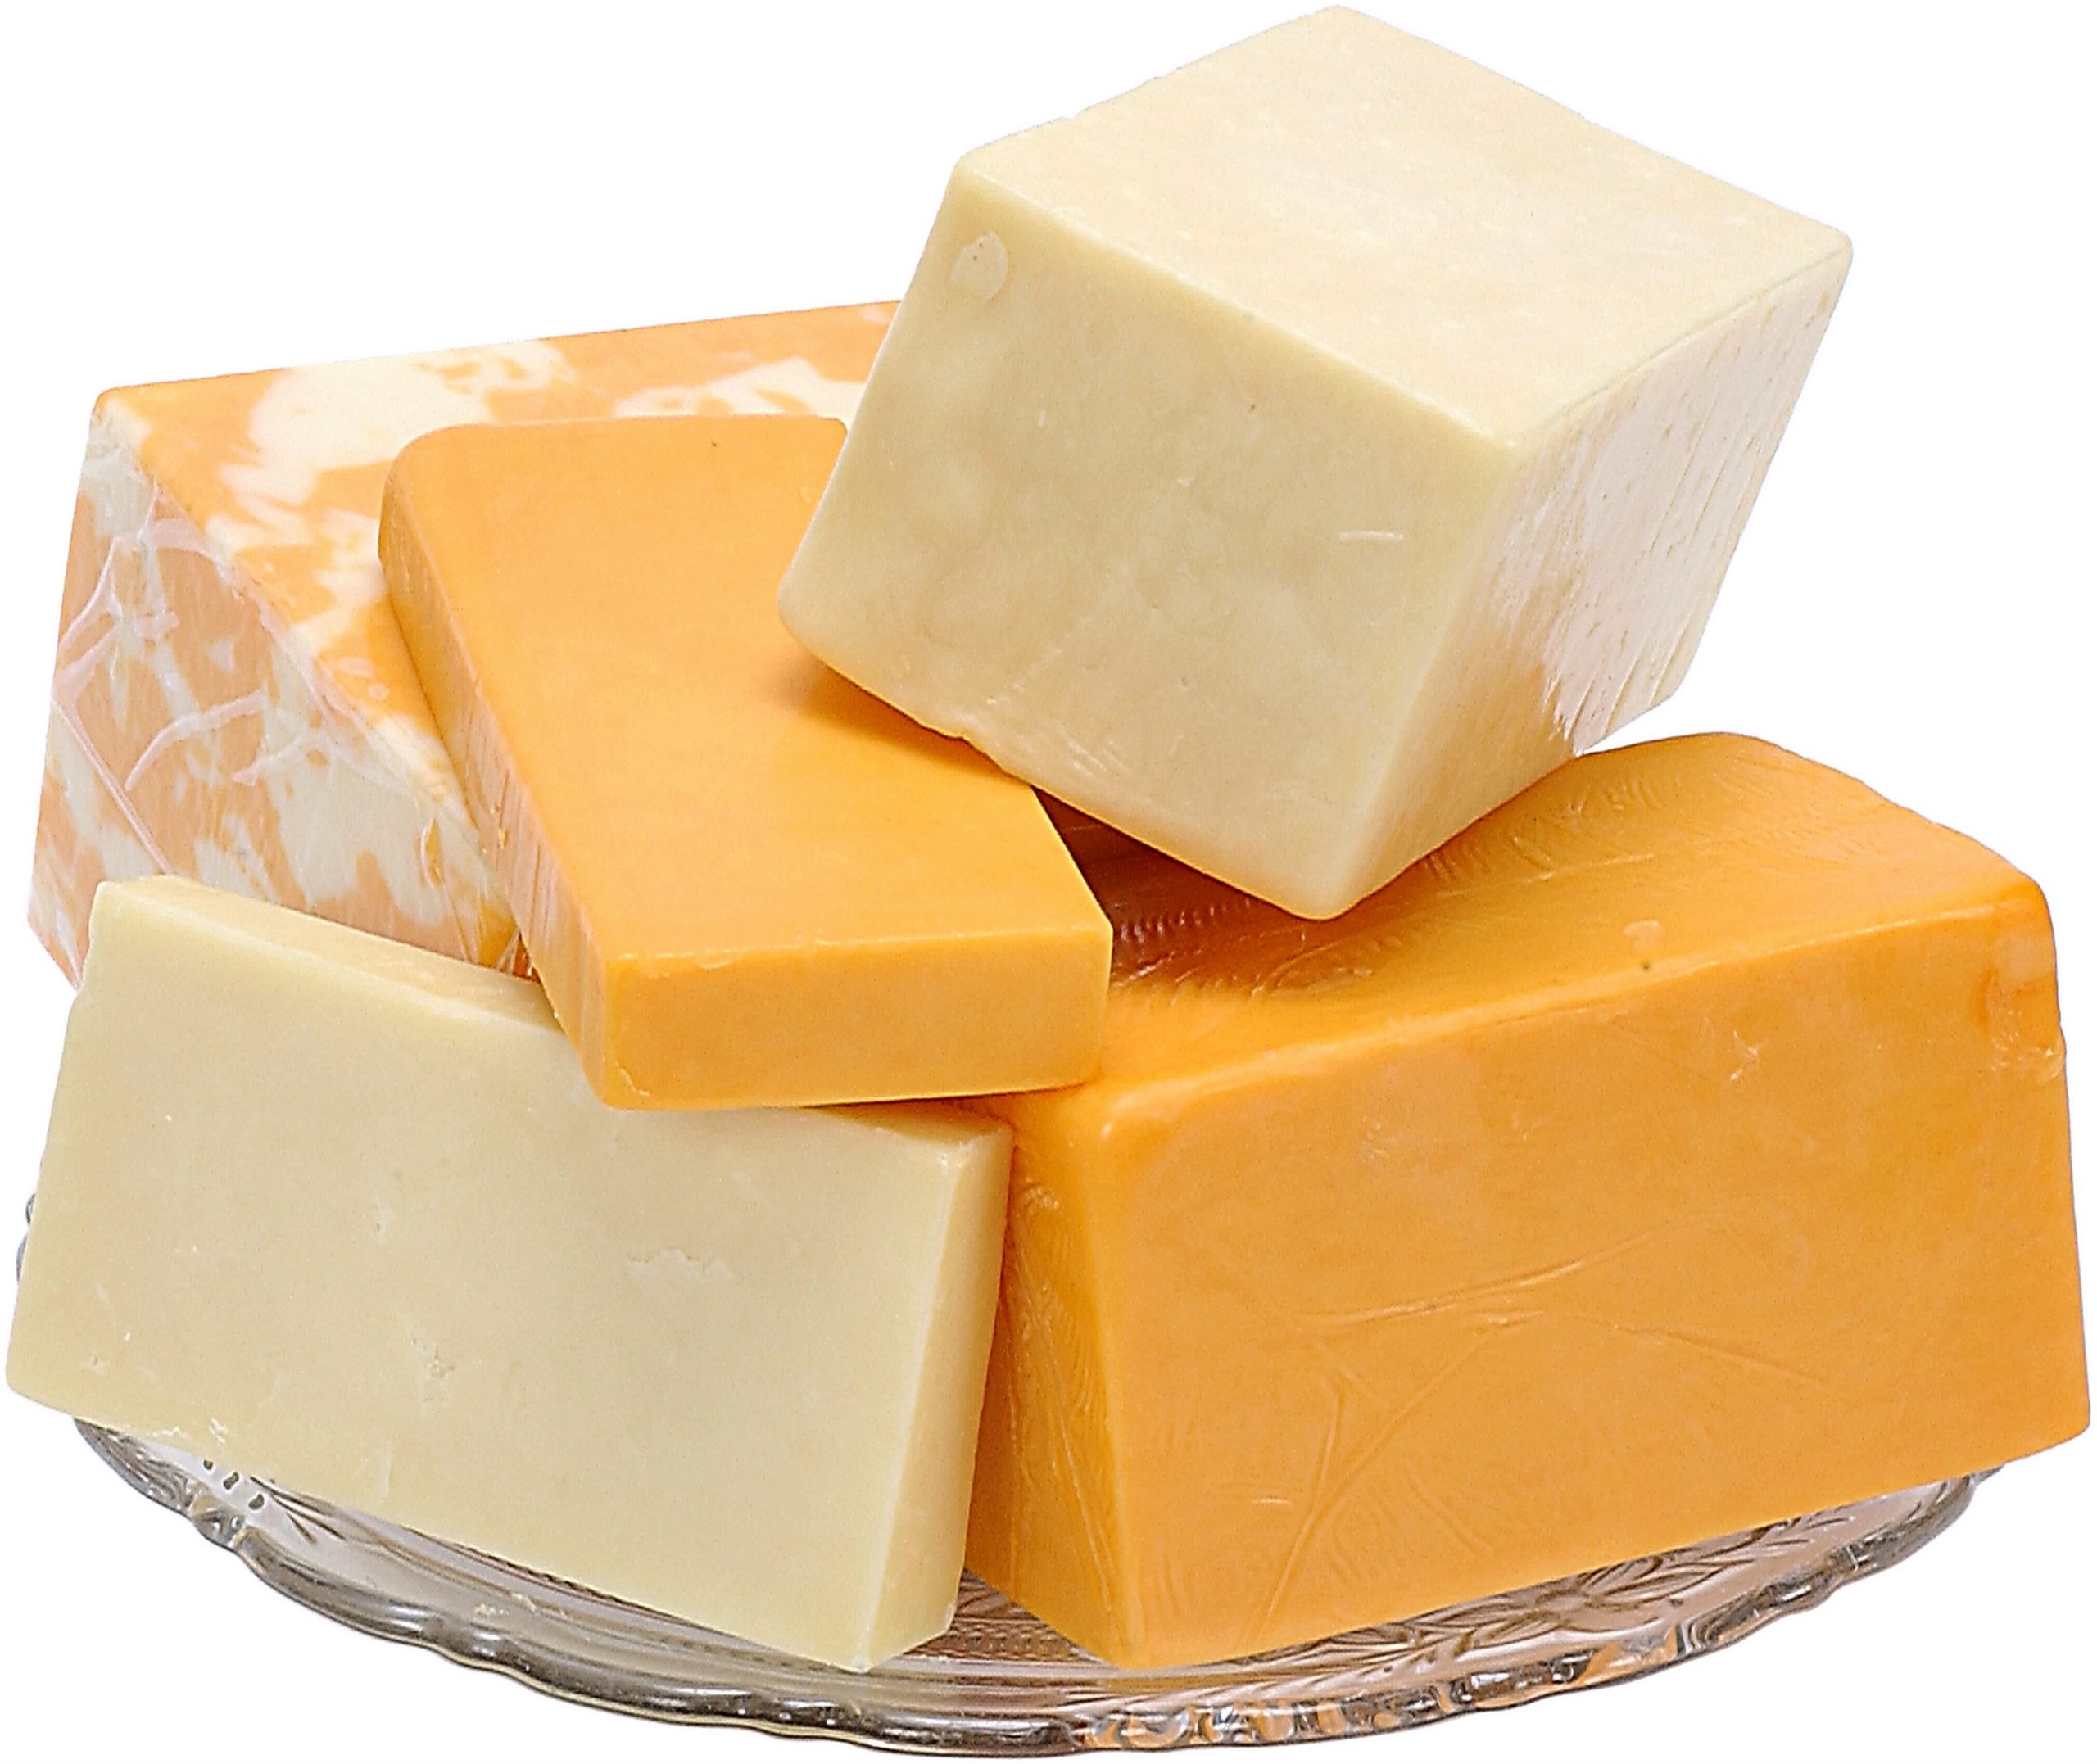 Cheese is wonderful, look at it